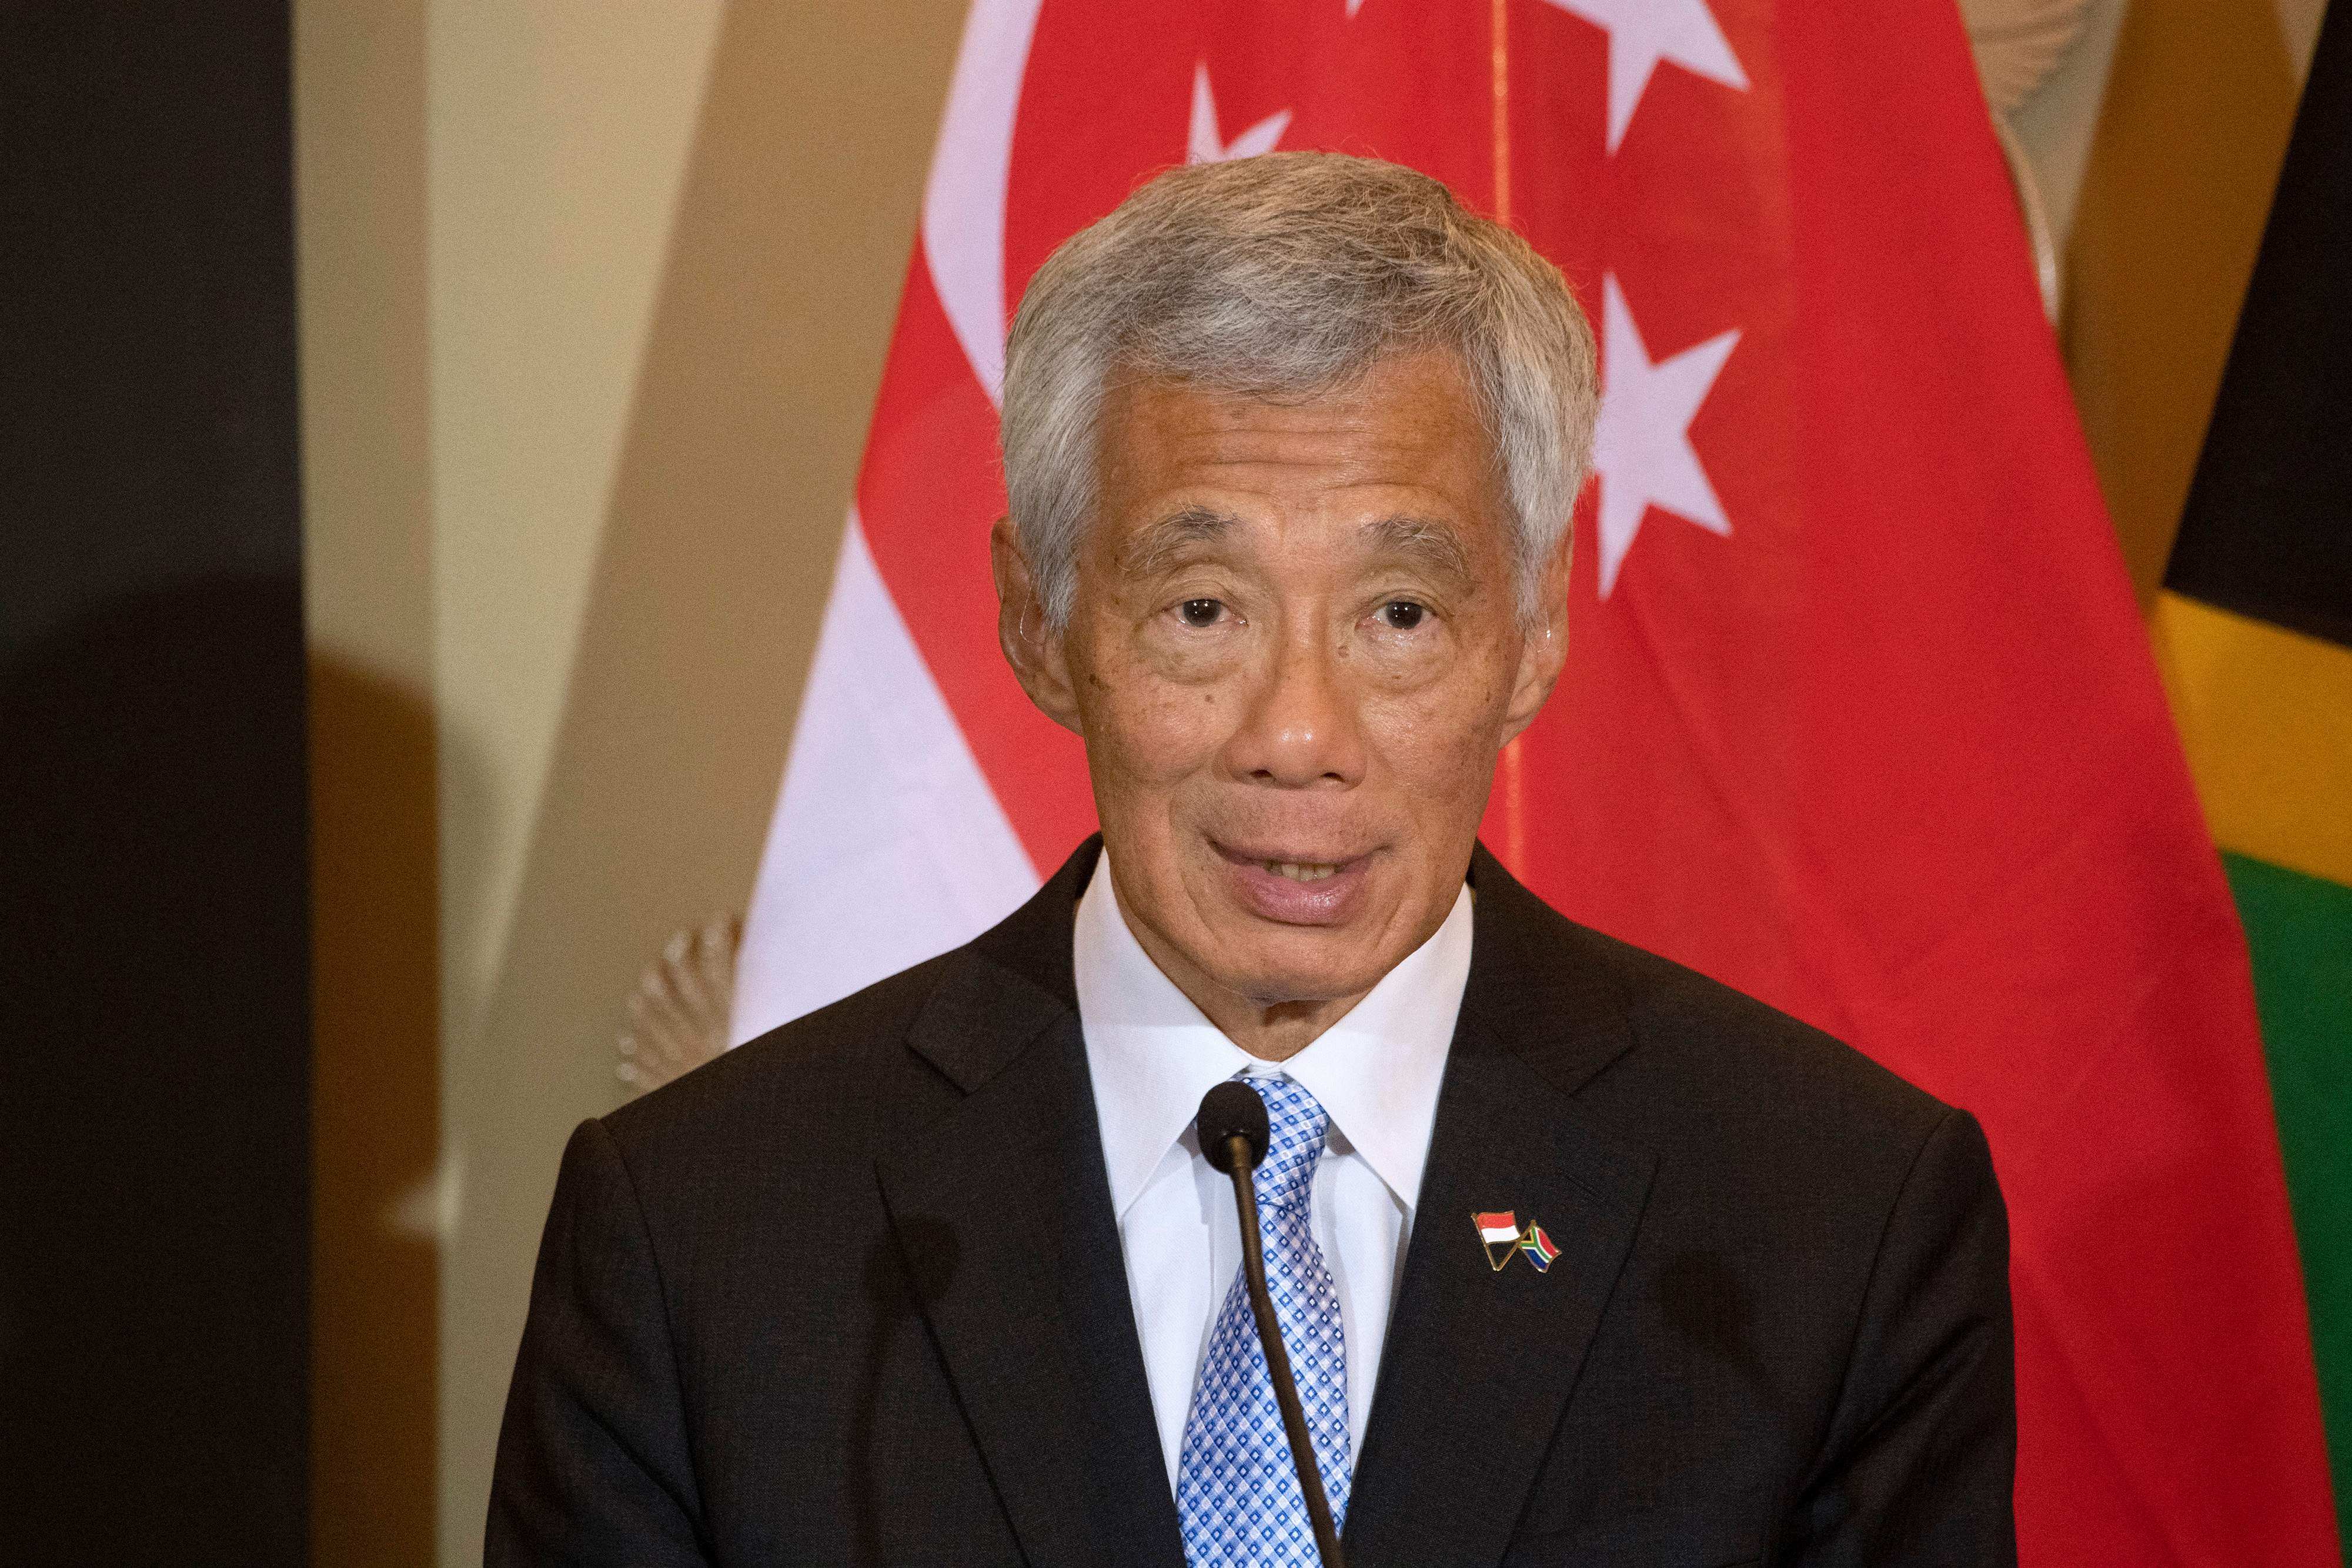 Singapore’s Prime Minister Lee Hsien Loong announced on Facebook that he has tested positive for Covid-19. Photo: File/AFP